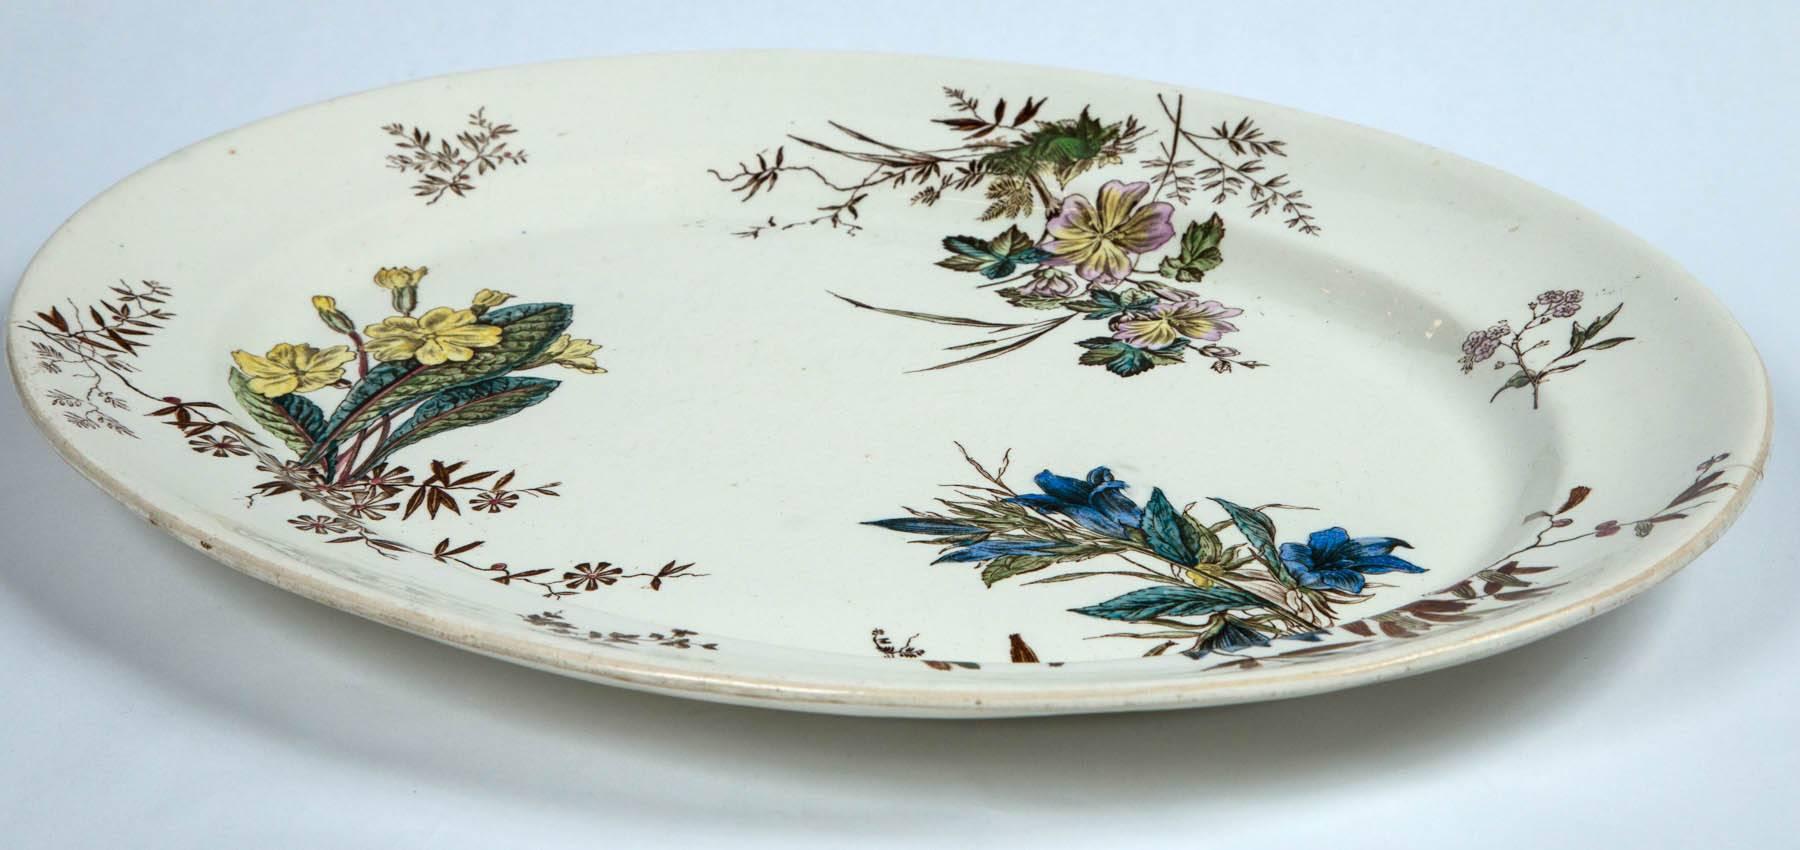 Antique Ceramic Serving Platter, Early 19th Century 1